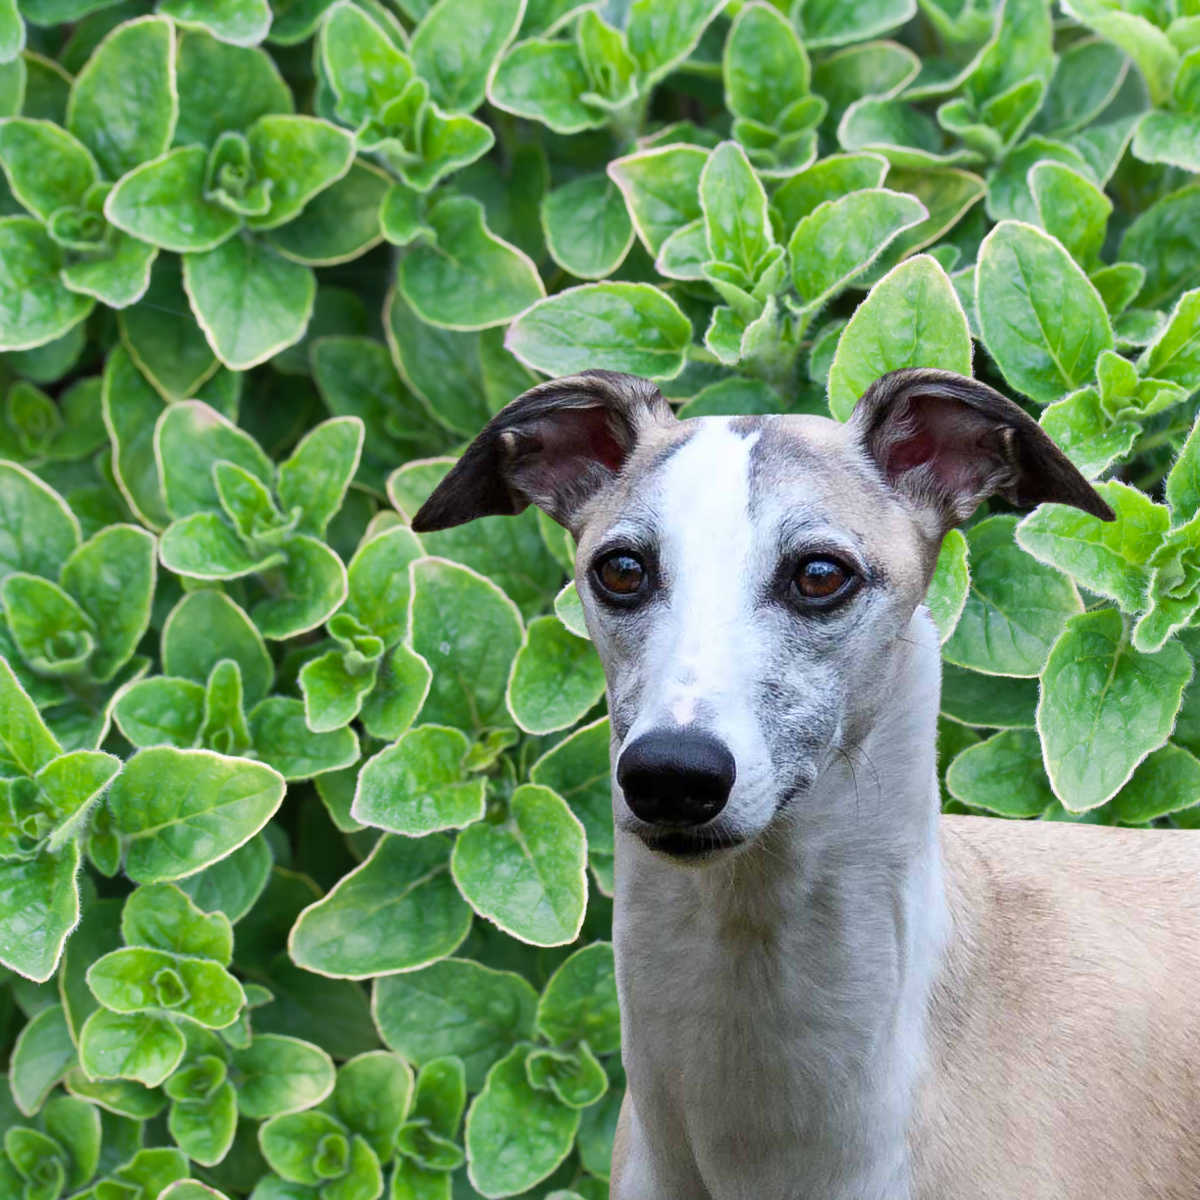 whippet dog in front of oregano plants.